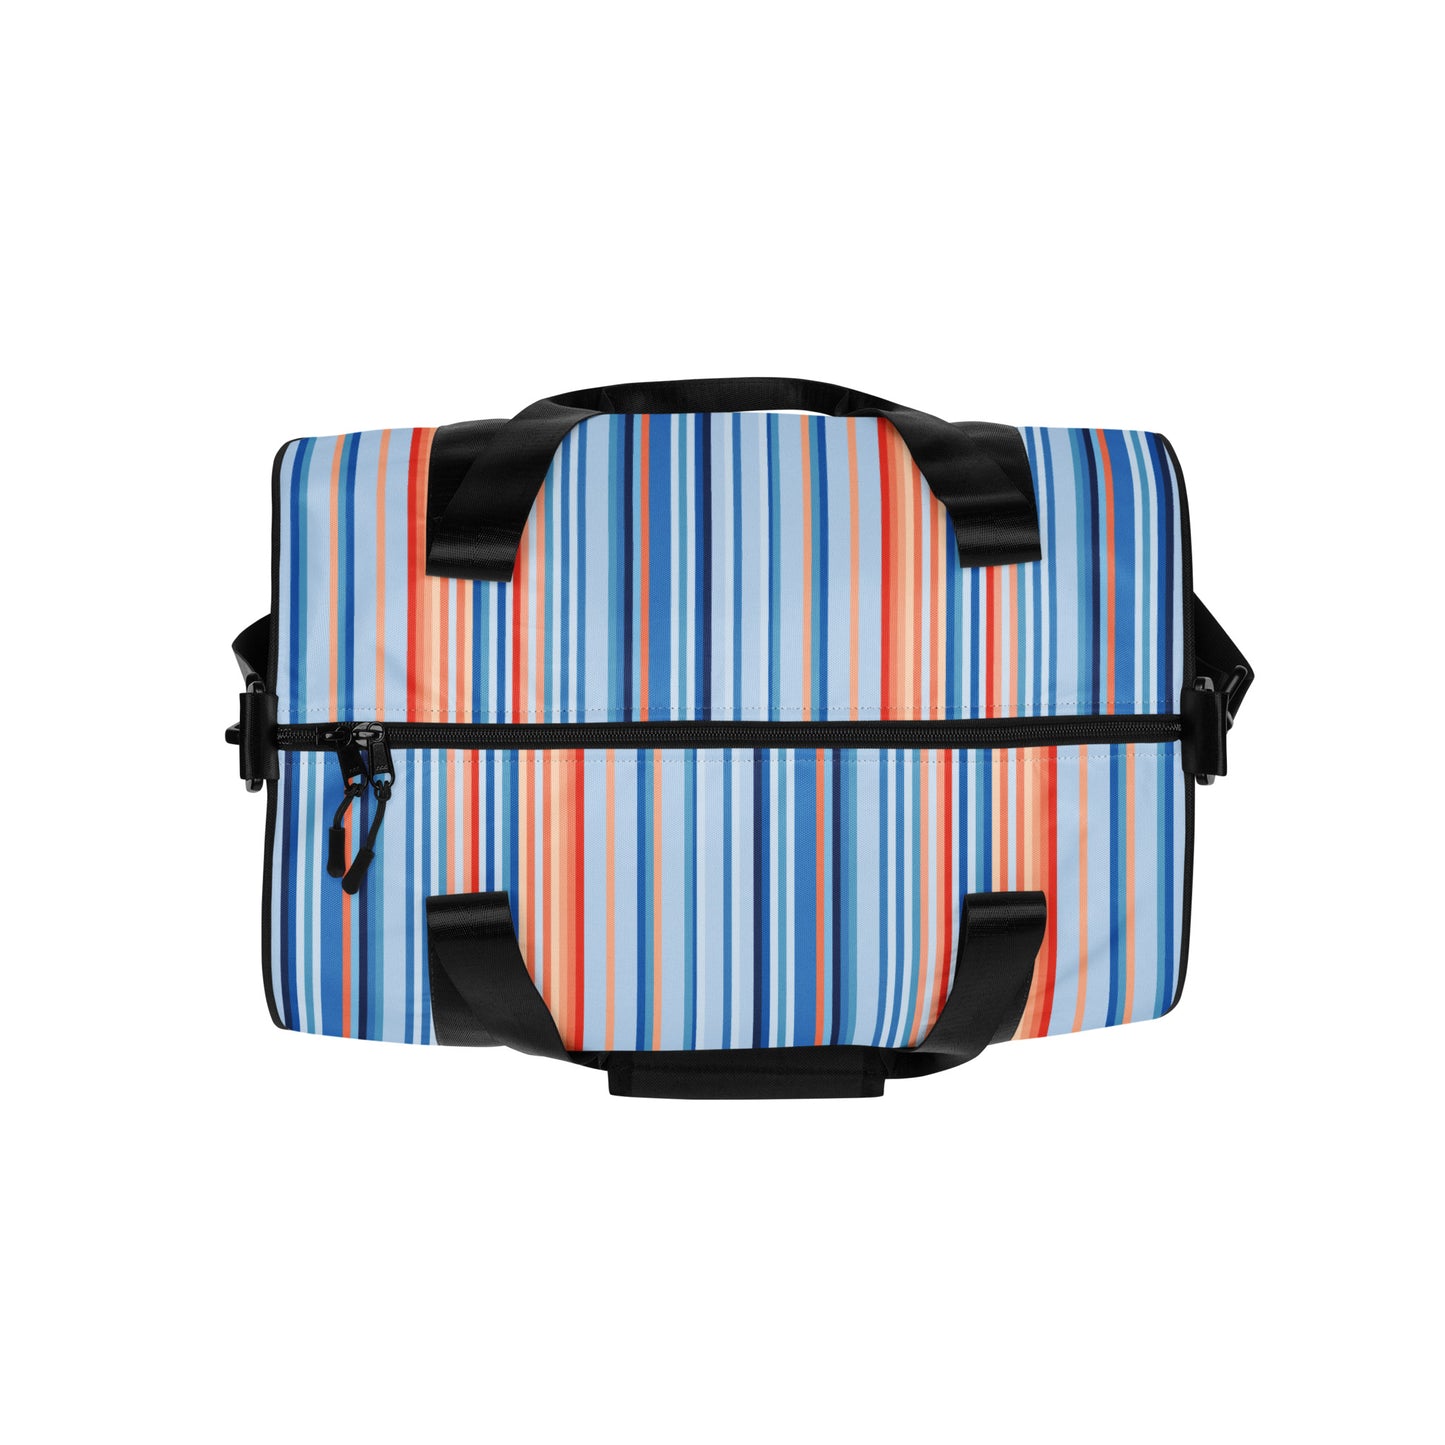 Climate Change Global Warming Stripes - Sustainably Made gym bag Vertical